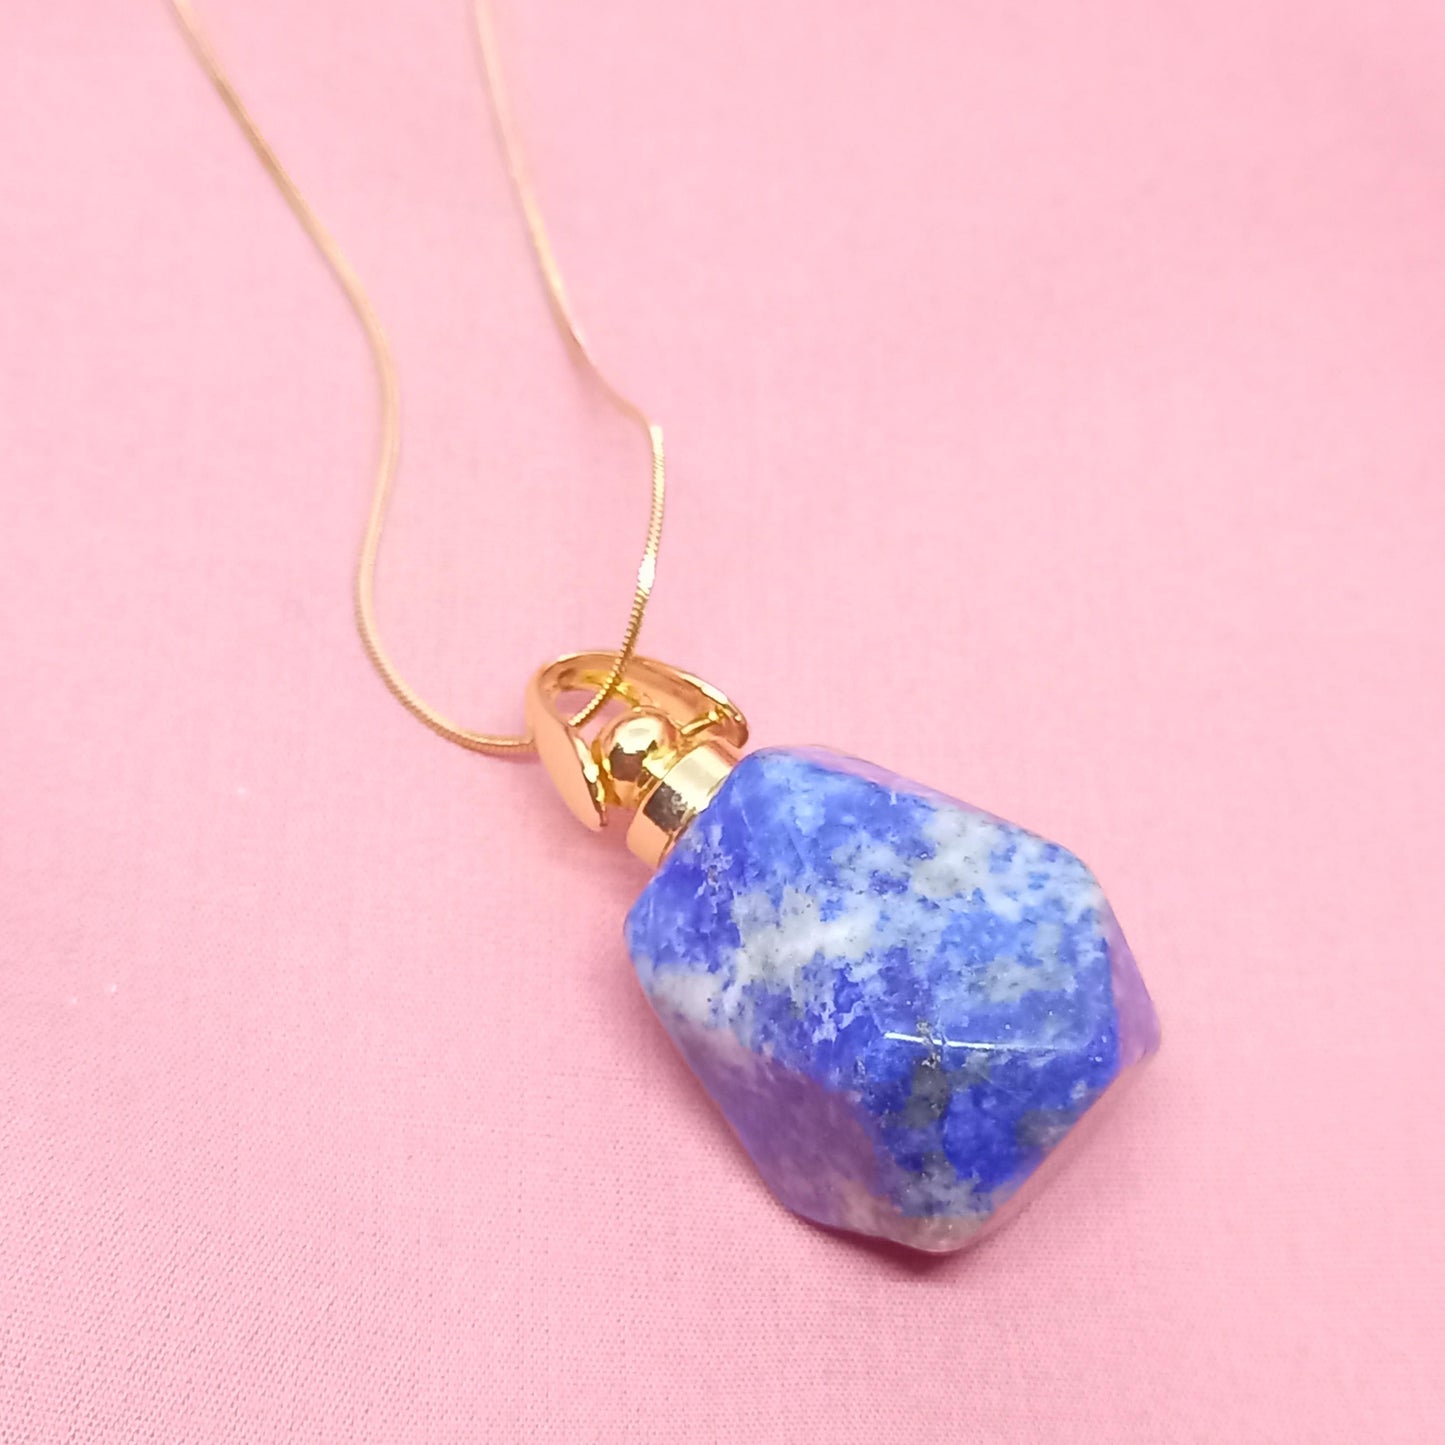 VIAL PENDANT MADE OF NATURAL LAPIS LAZULI STONES + STAINLESS STEEL NECKLACE